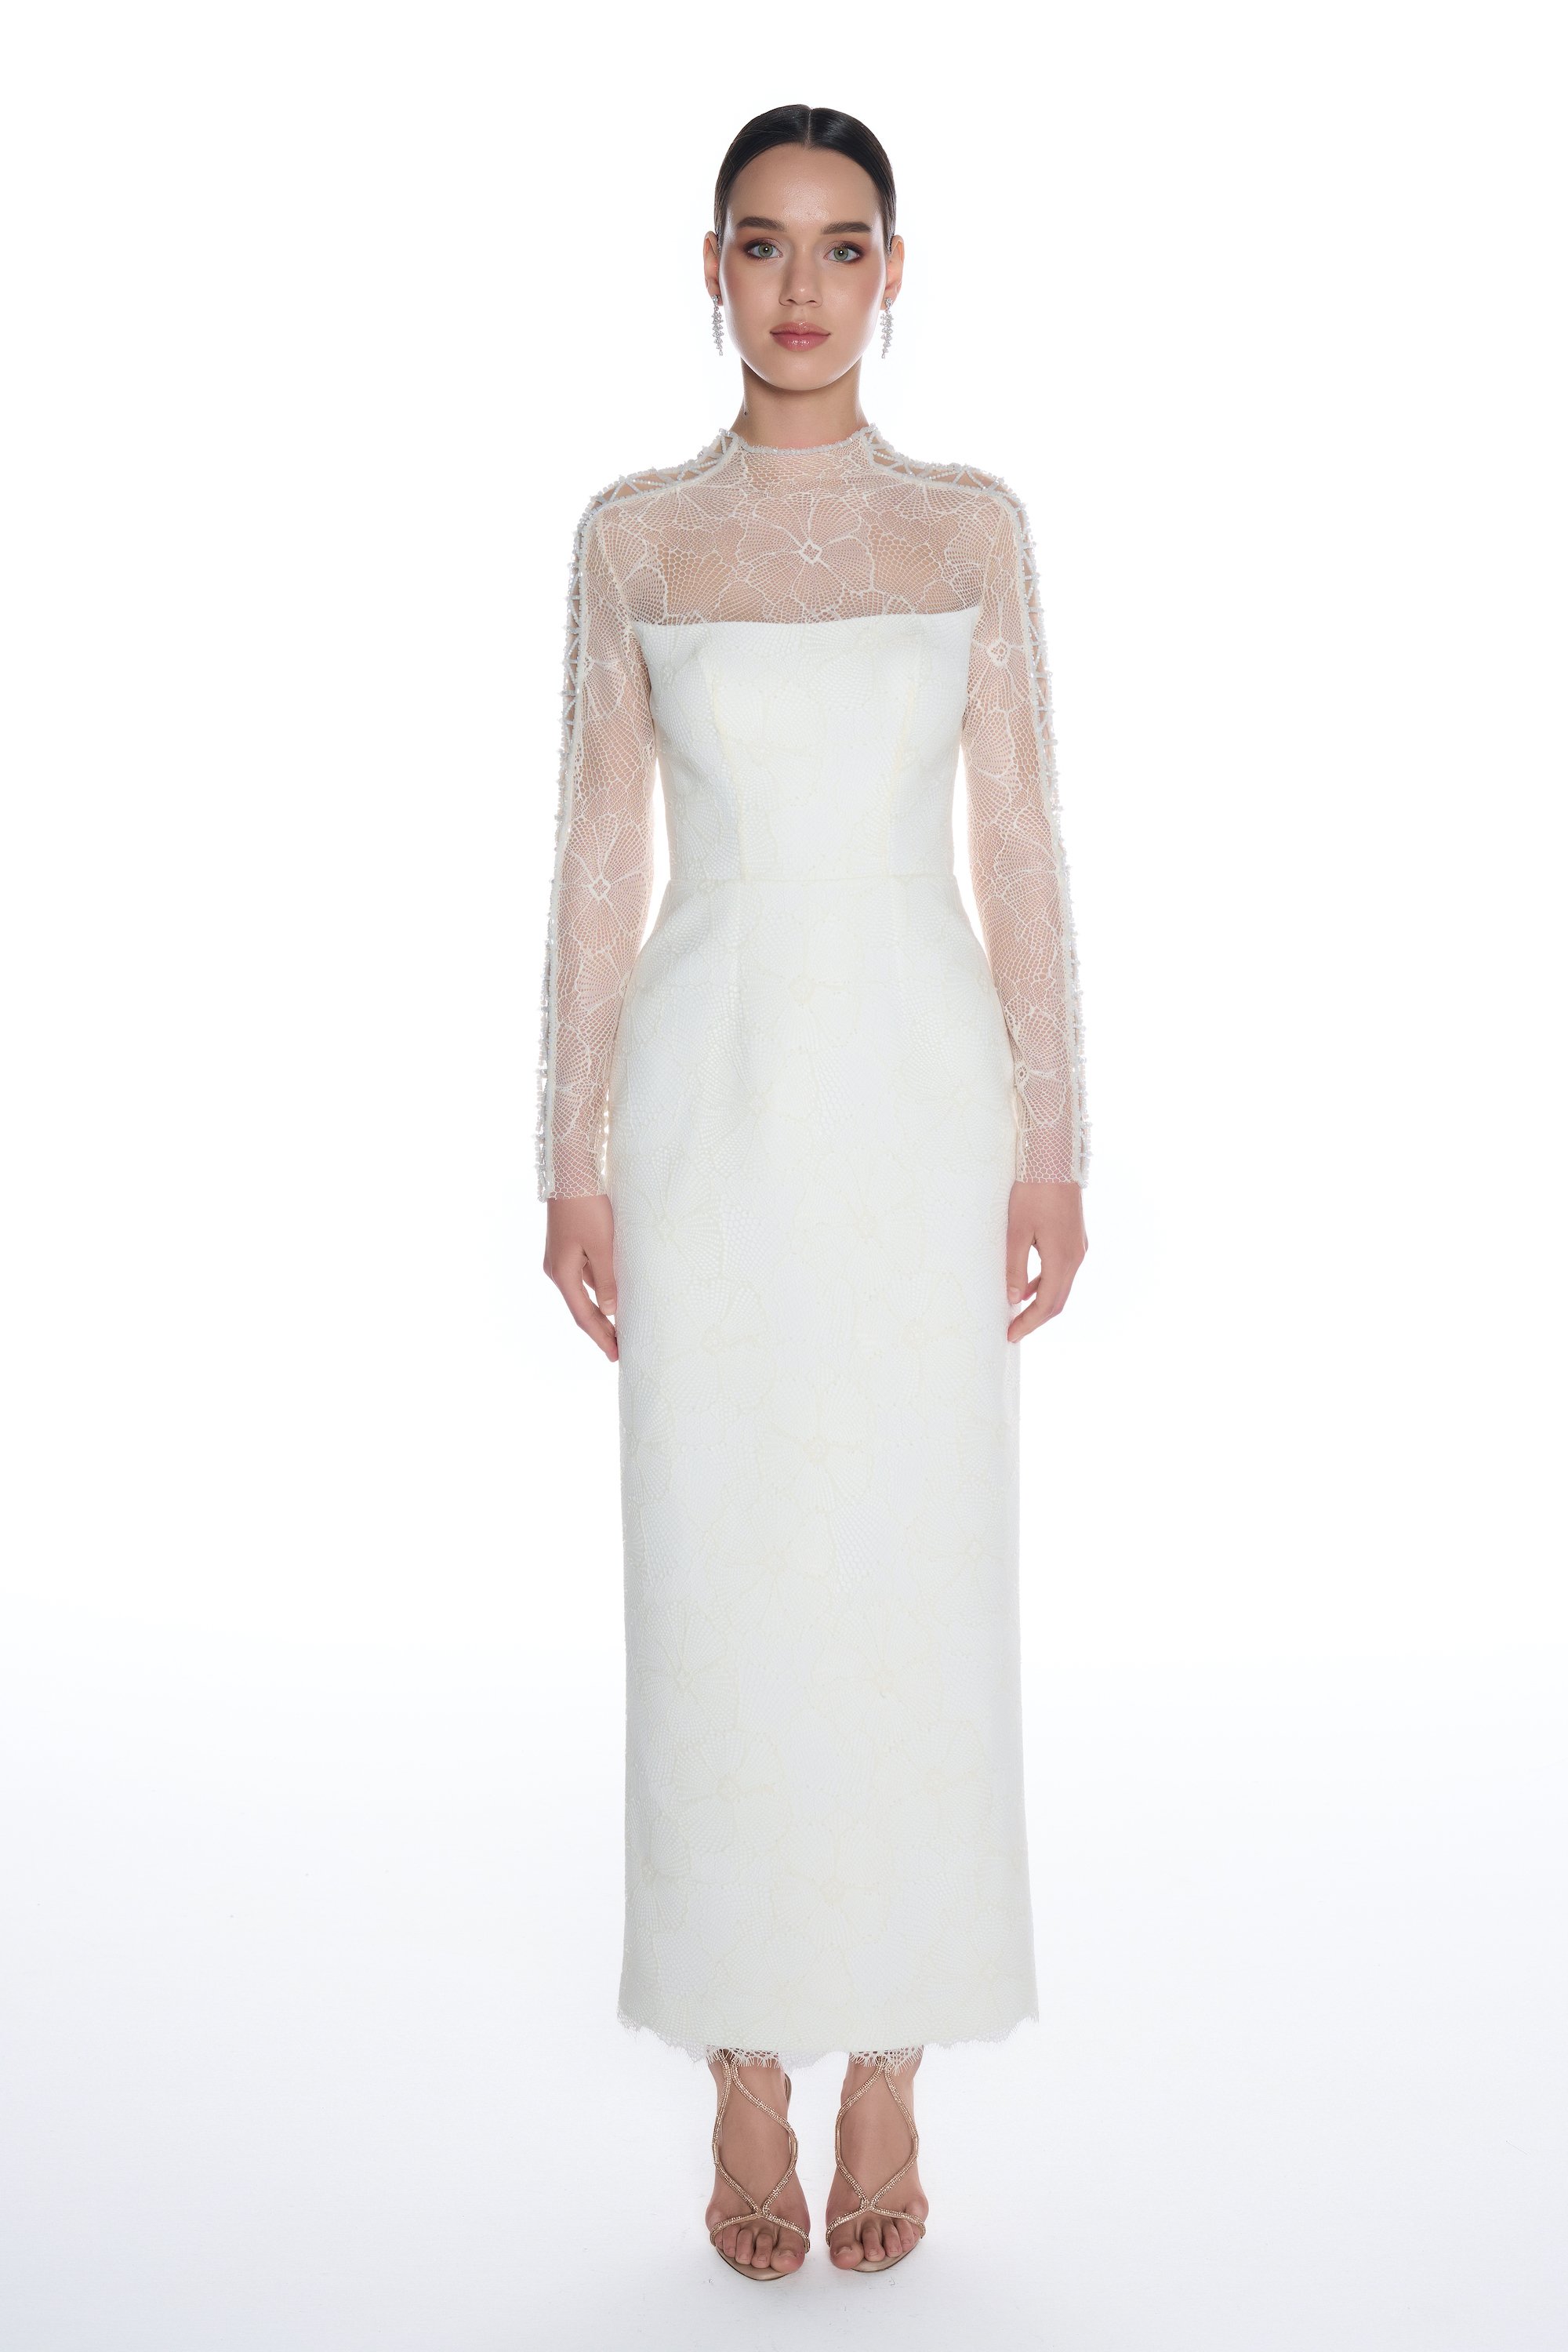 R06 - High Neckline, Crystal Stone Hand-Embroidery Detail on Shoulders, Full Lace, Back Slit, Long Pencil Dress